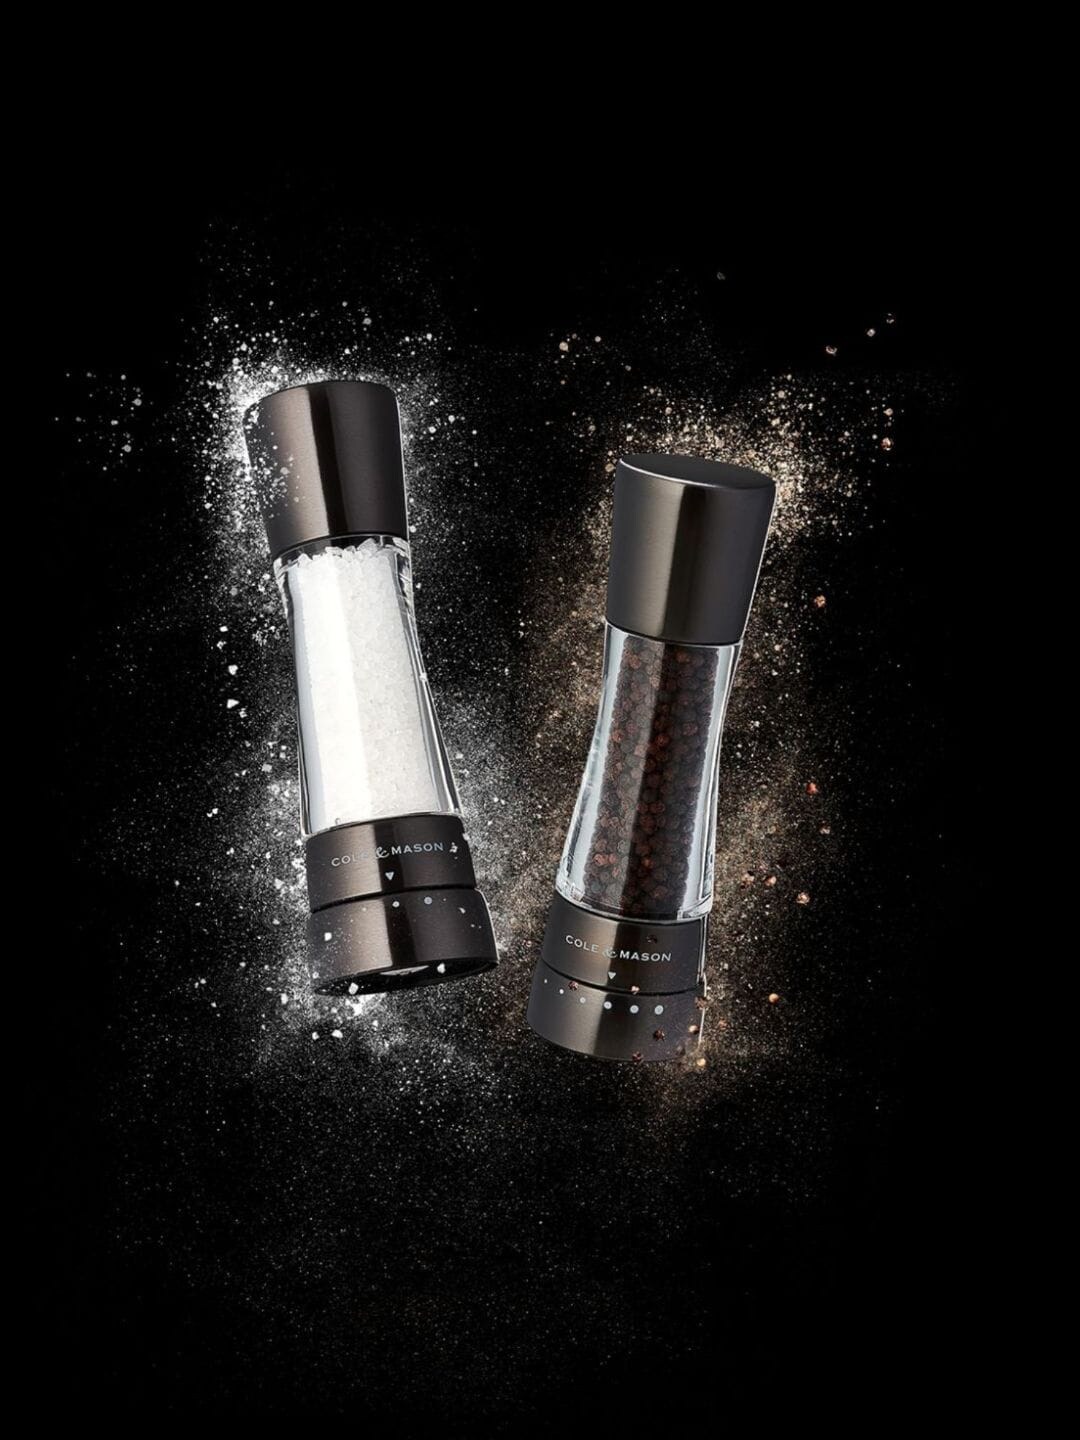 COLE & MASON Transparent & Black Solid Salt And Pepper Mills Price in India